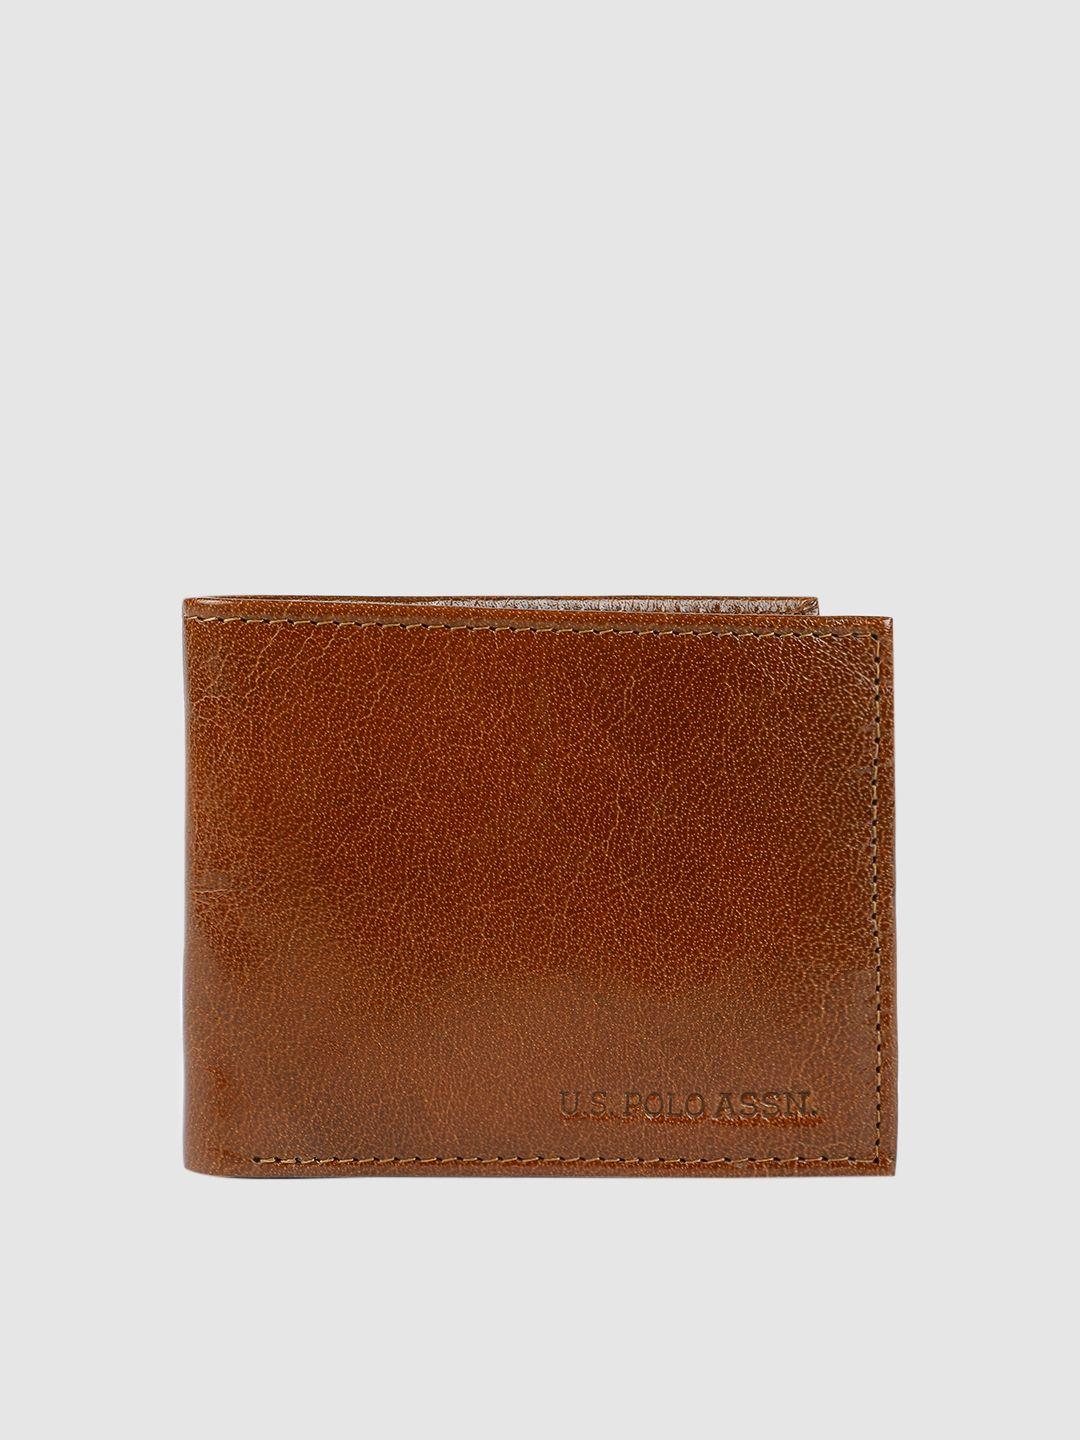 u.s. polo assn. men tan brown solid leather two fold wallet